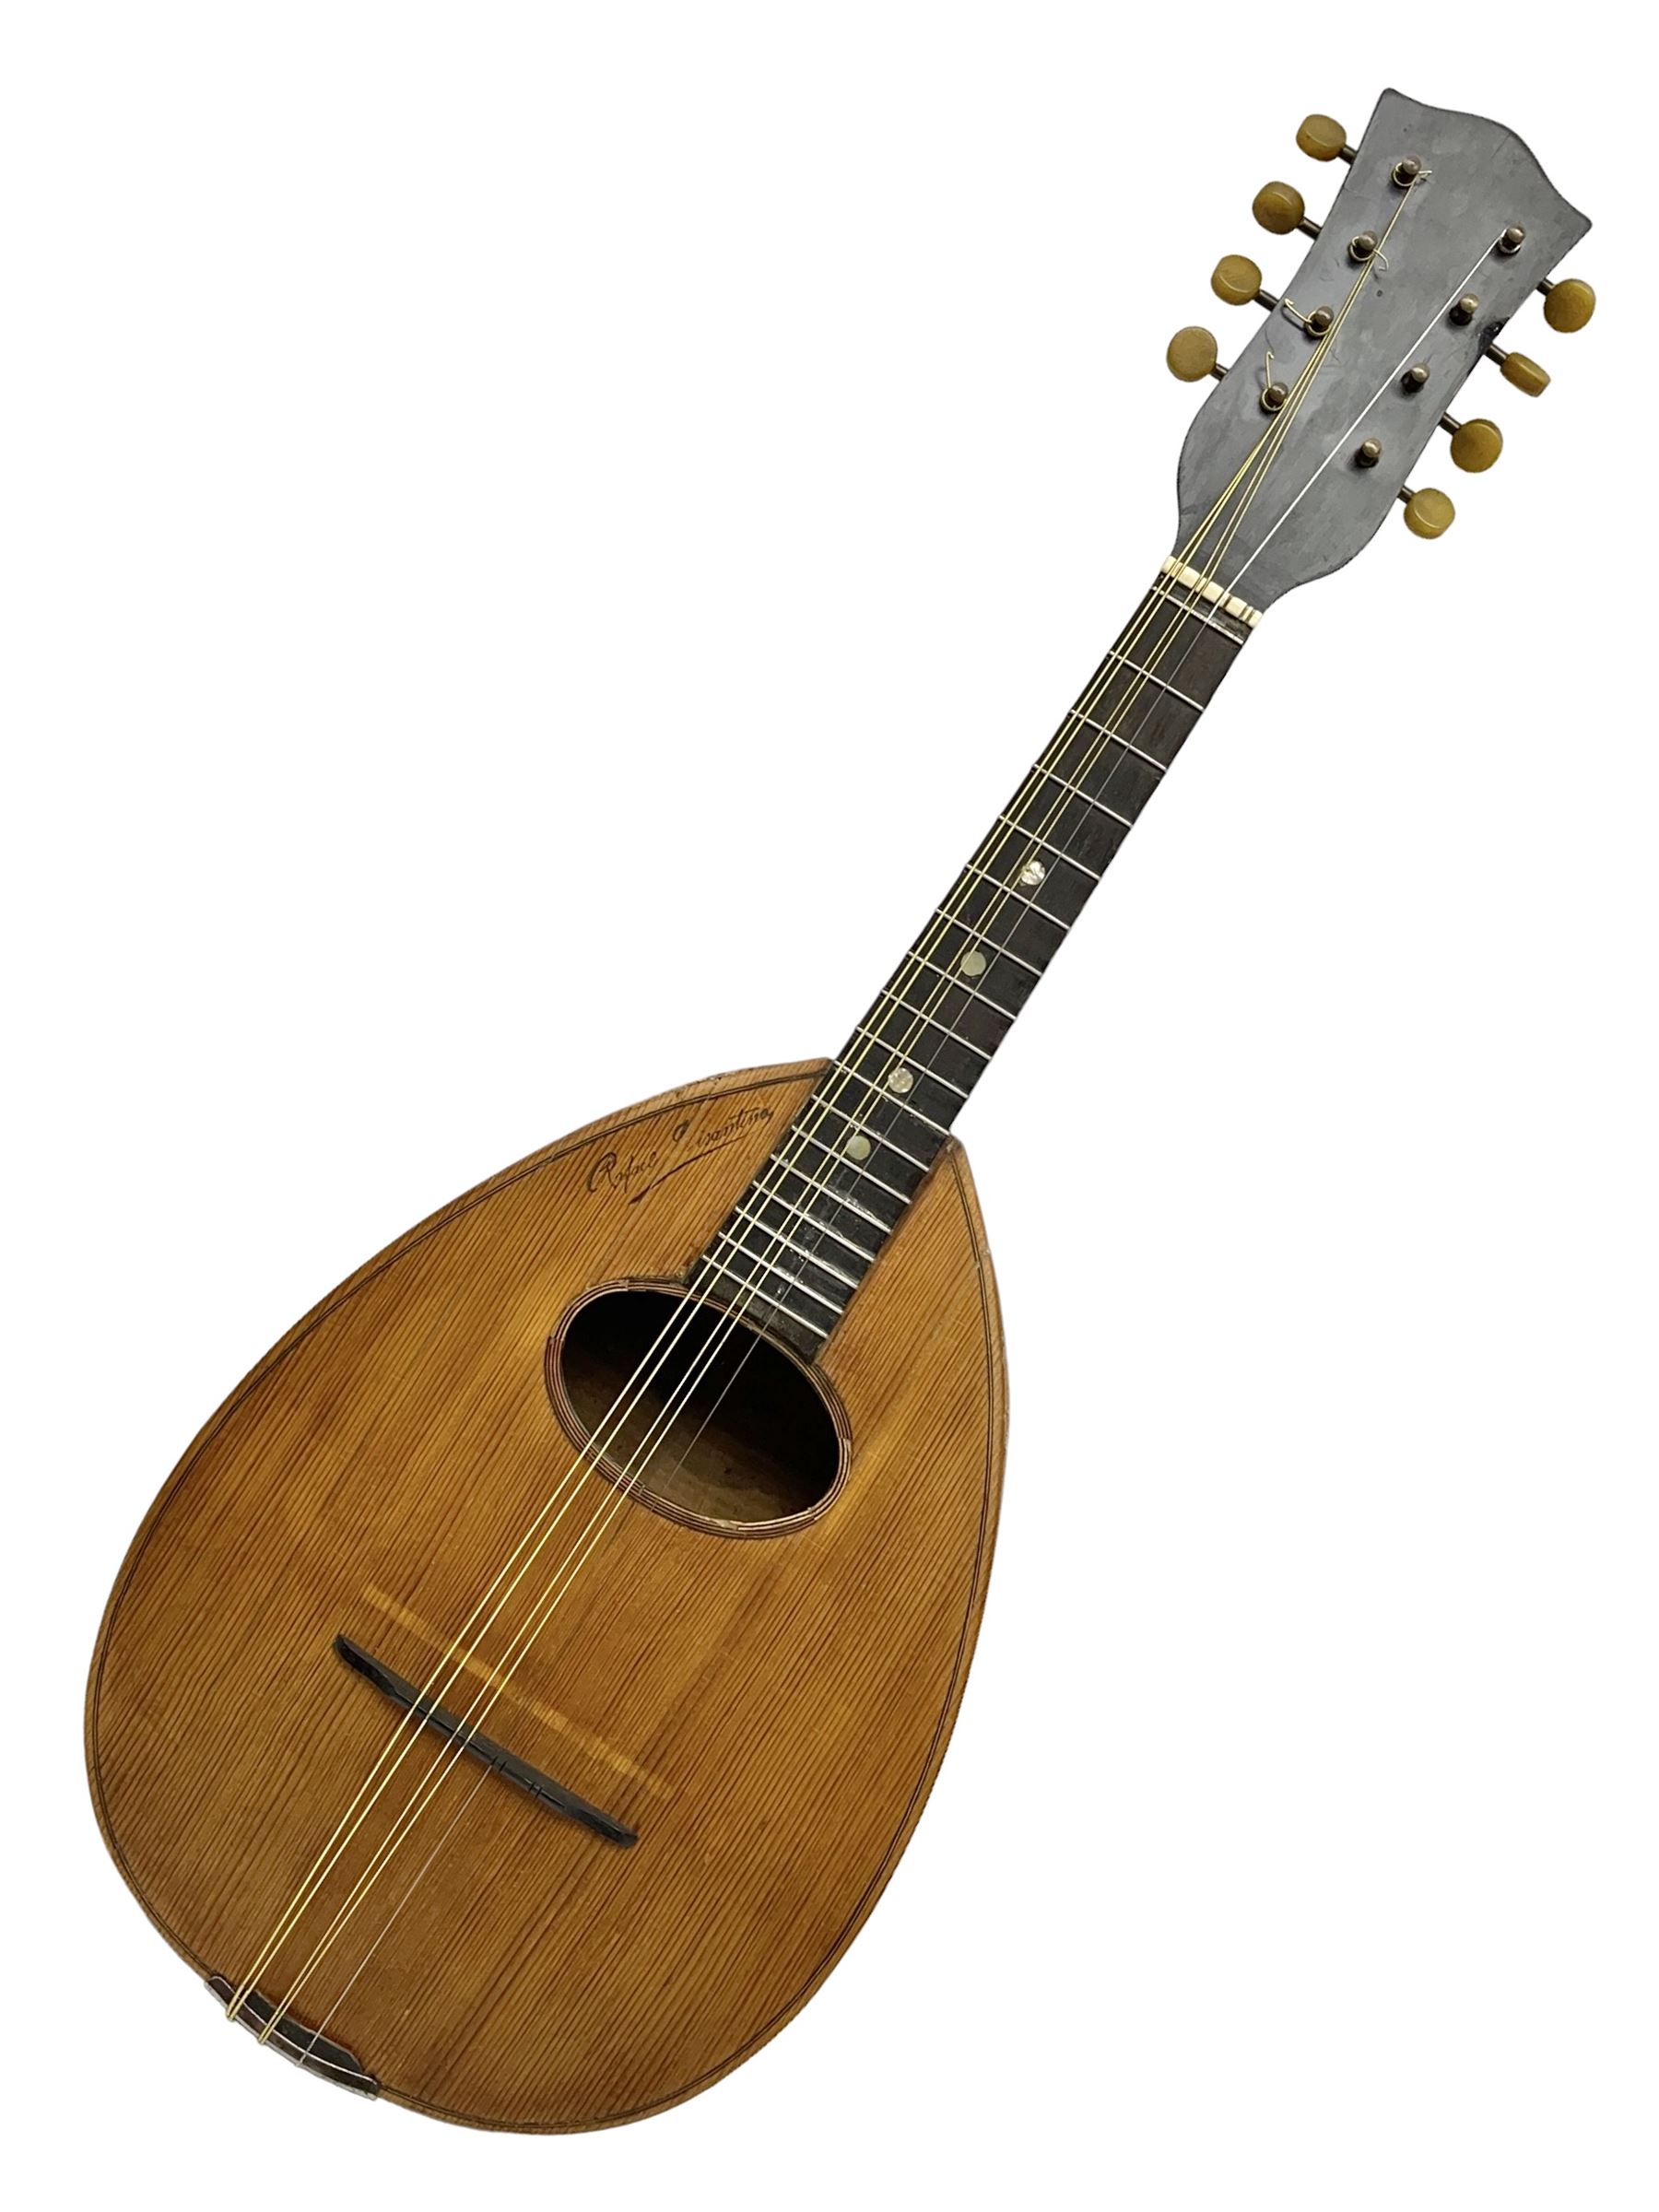 Early 20th century Italian Rafaele Disantino eight-string mandolin with two-piece back and spruce to